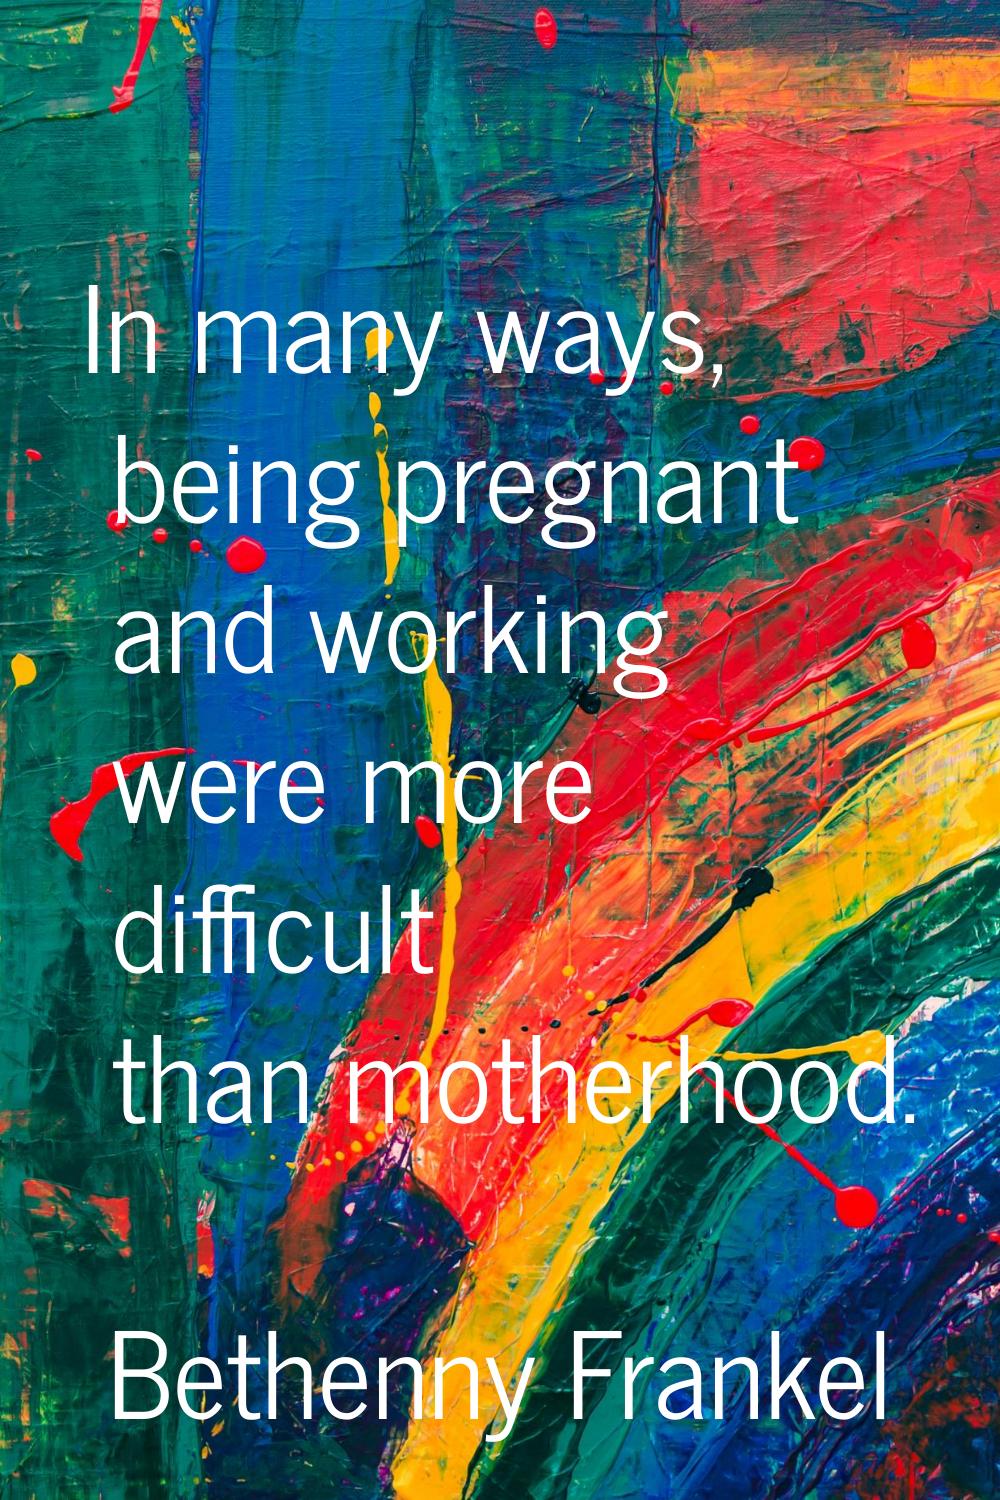 In many ways, being pregnant and working were more difficult than motherhood.